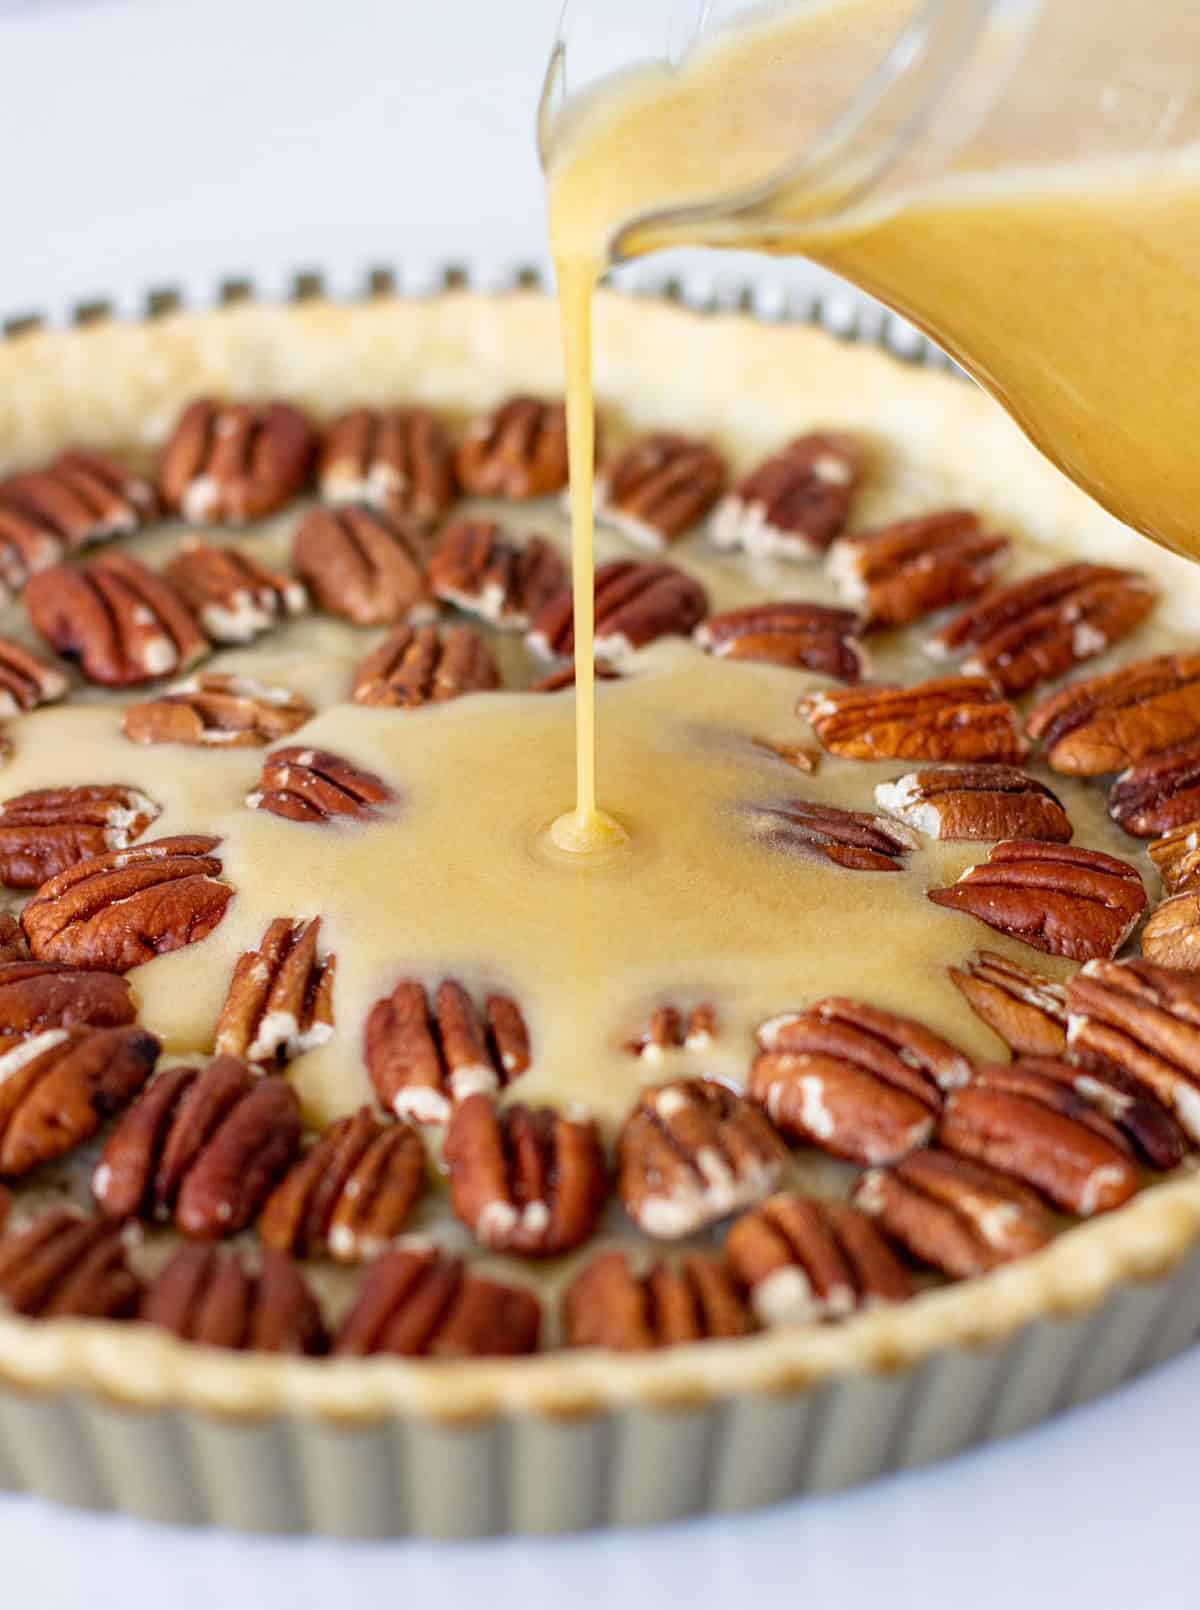 Bourbon butter filling being poured in a pie crust filled with pecans.